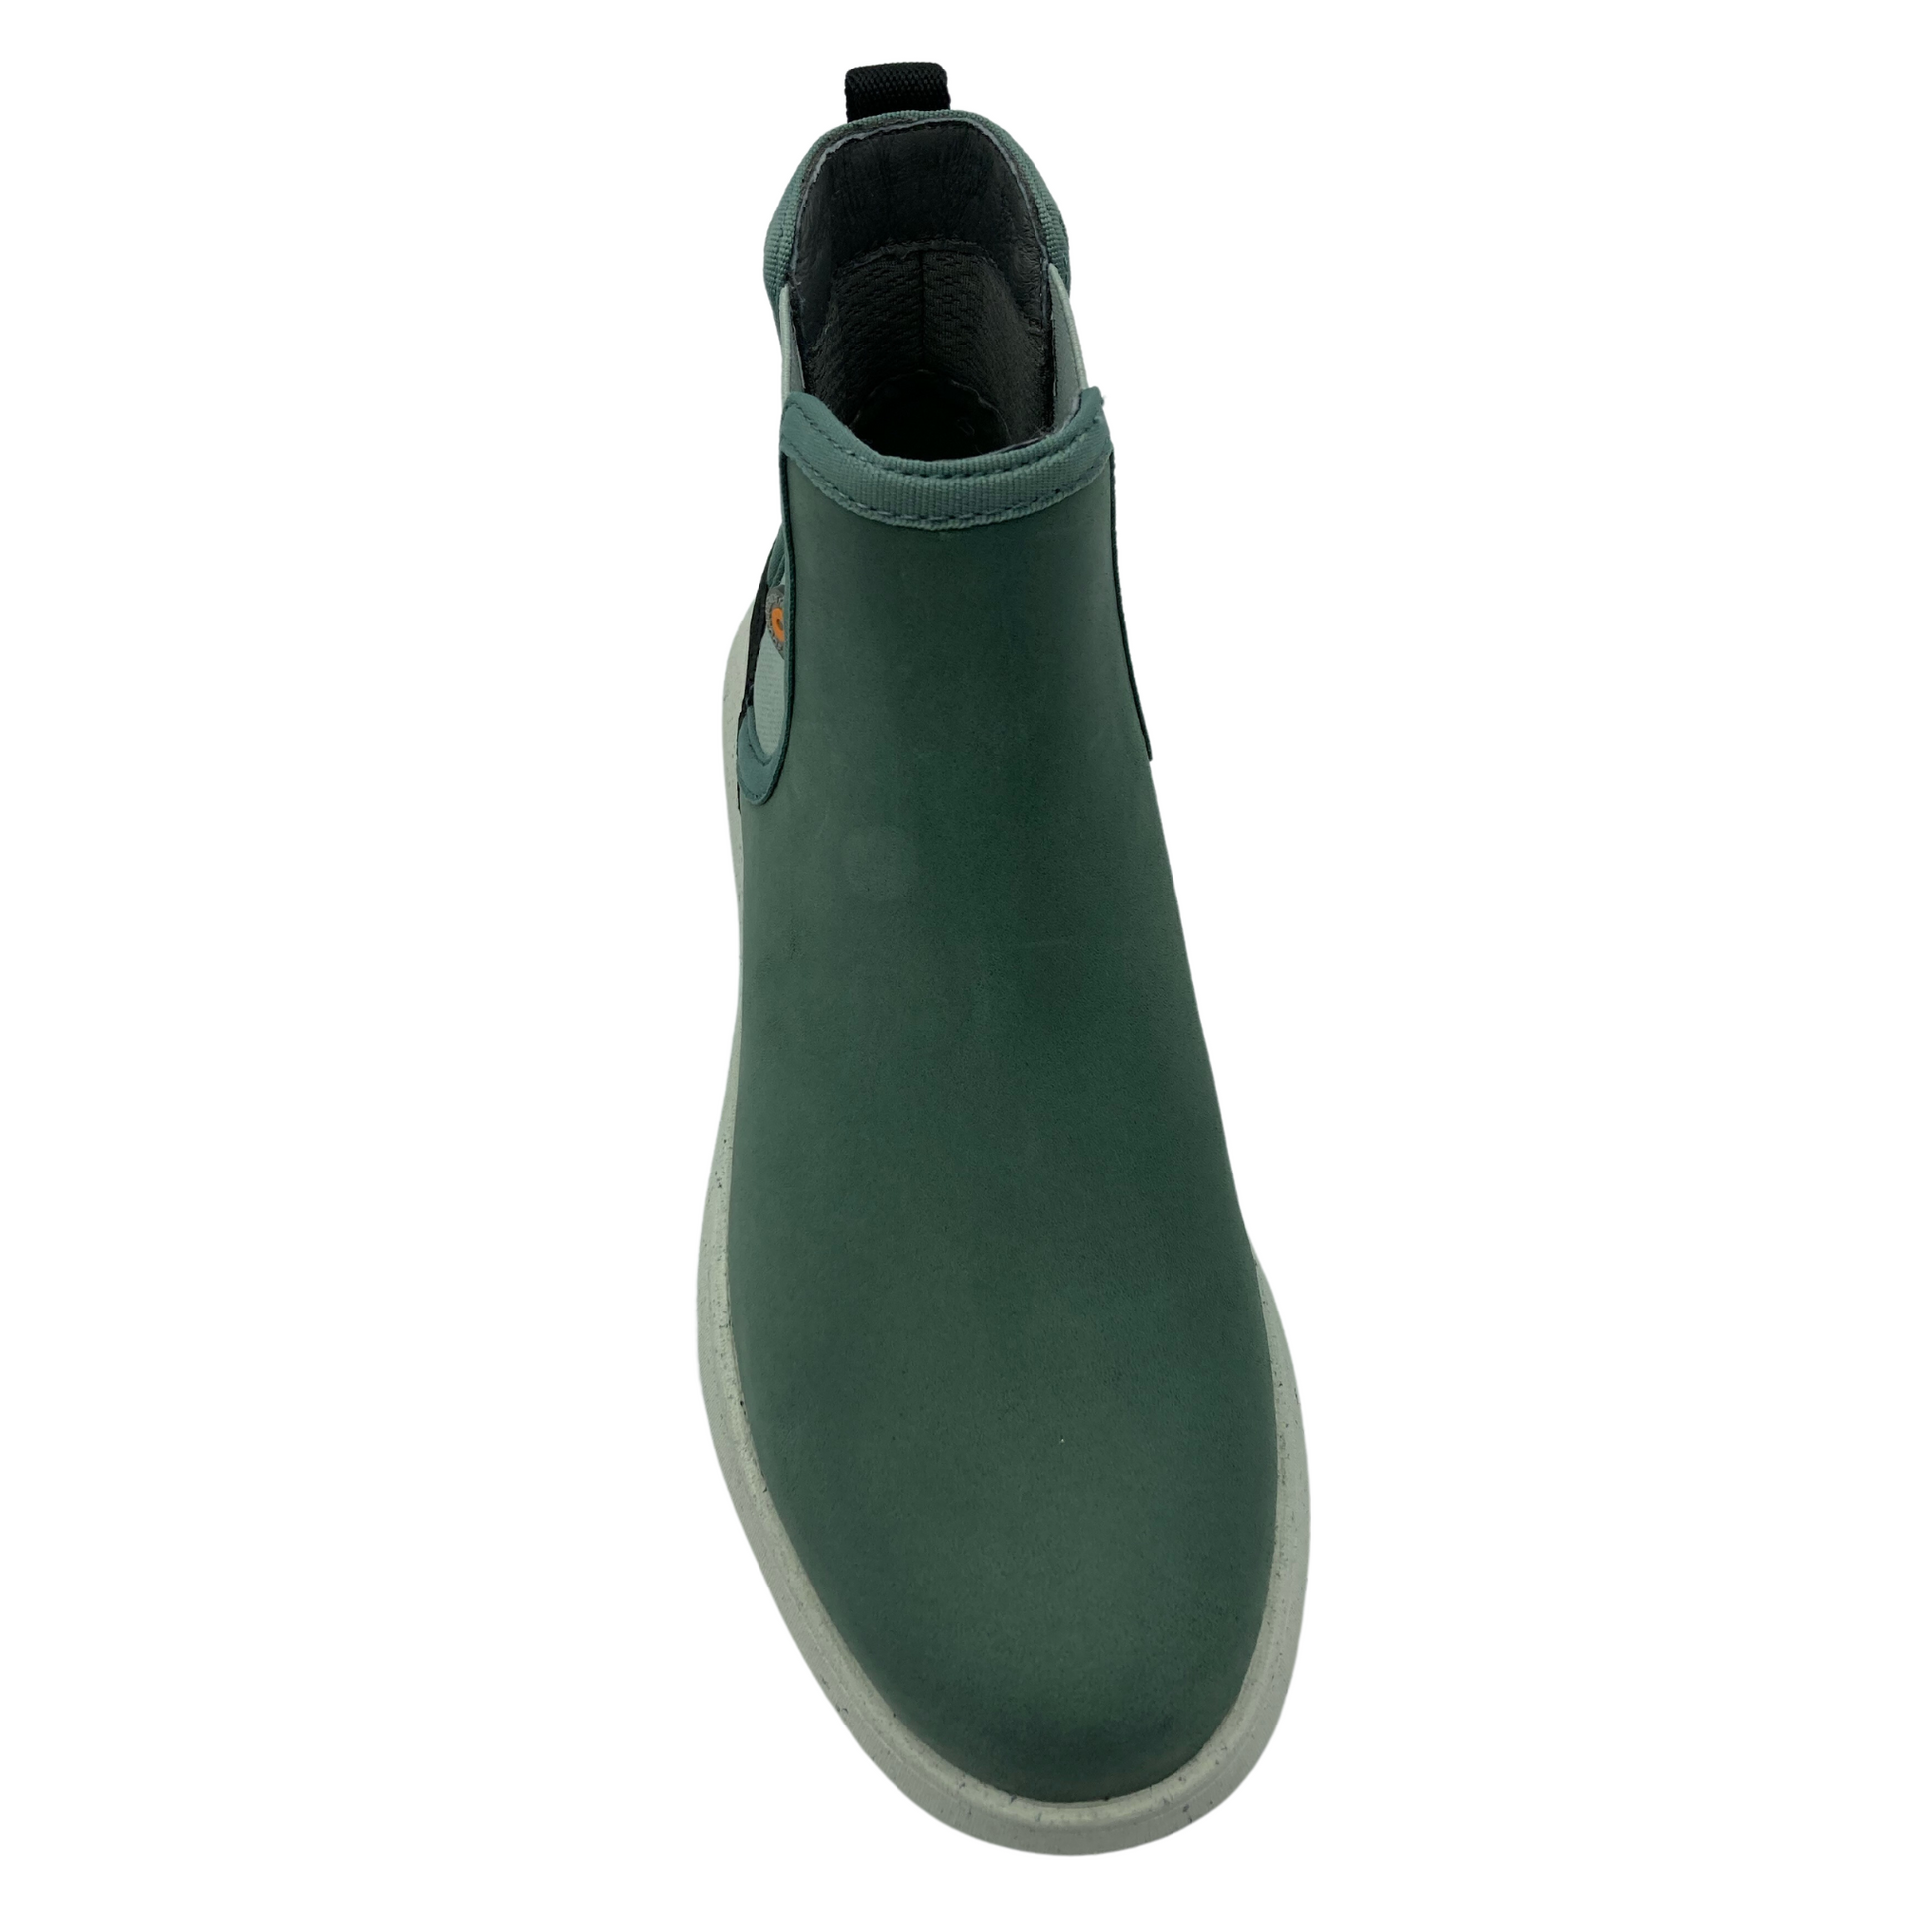 Top view of light green, short leather boot with rounded toe and white outsole